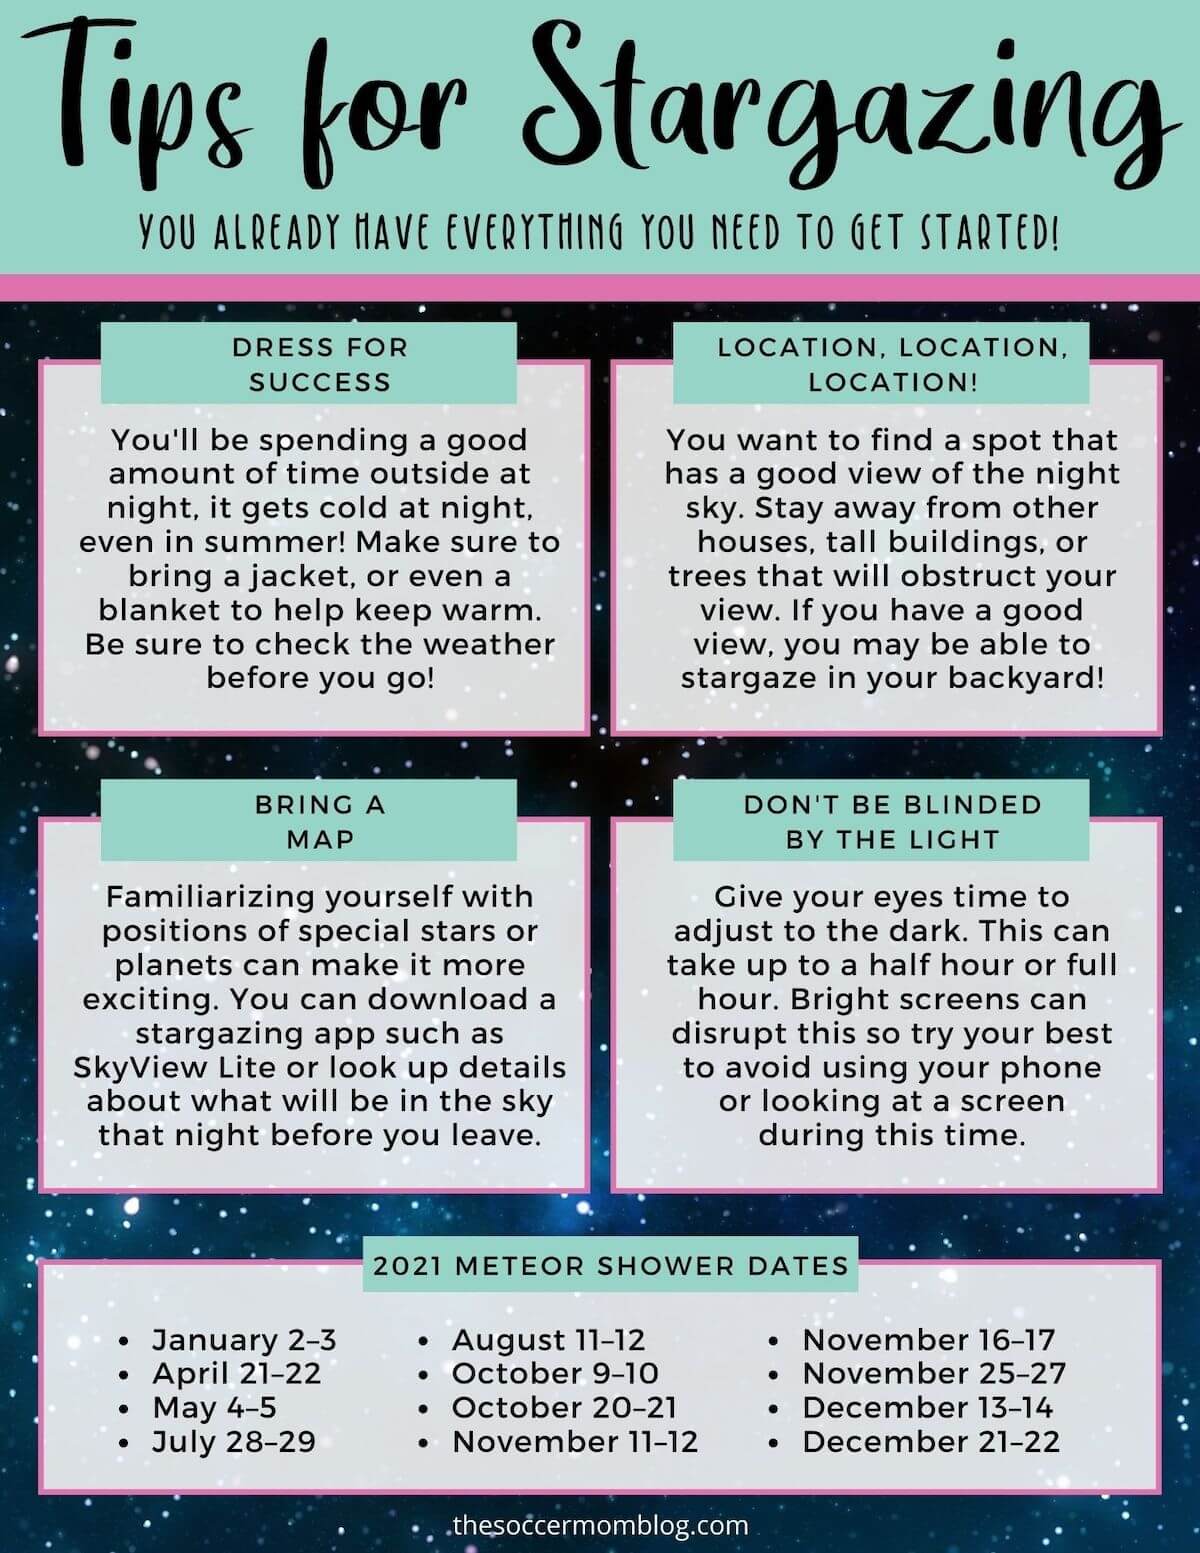 chart with tips for stargazing and meteor shower dates